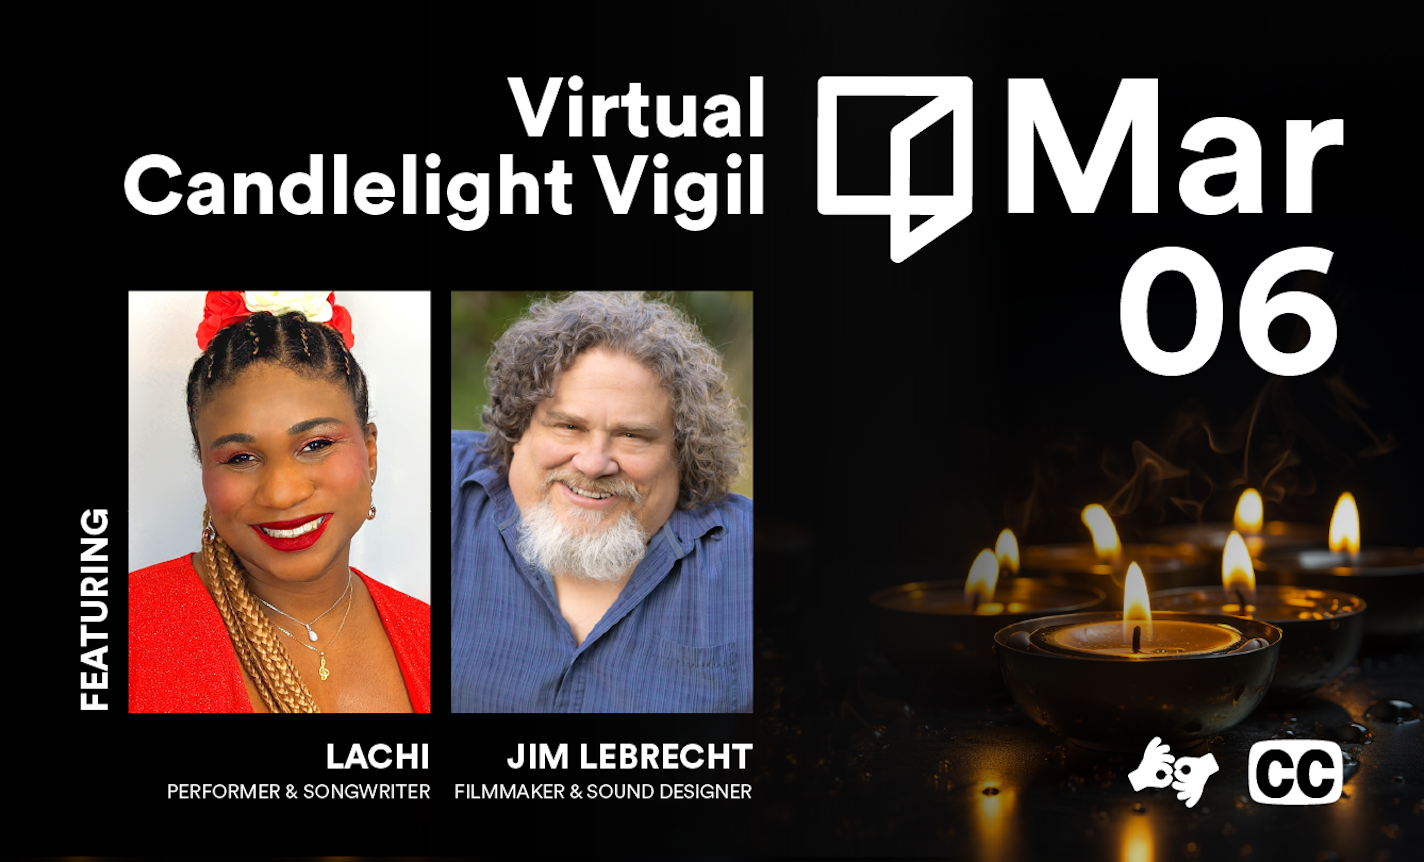 Reimagine Virtual Candlelight Vigil with Lachi and Jim LeBrecht